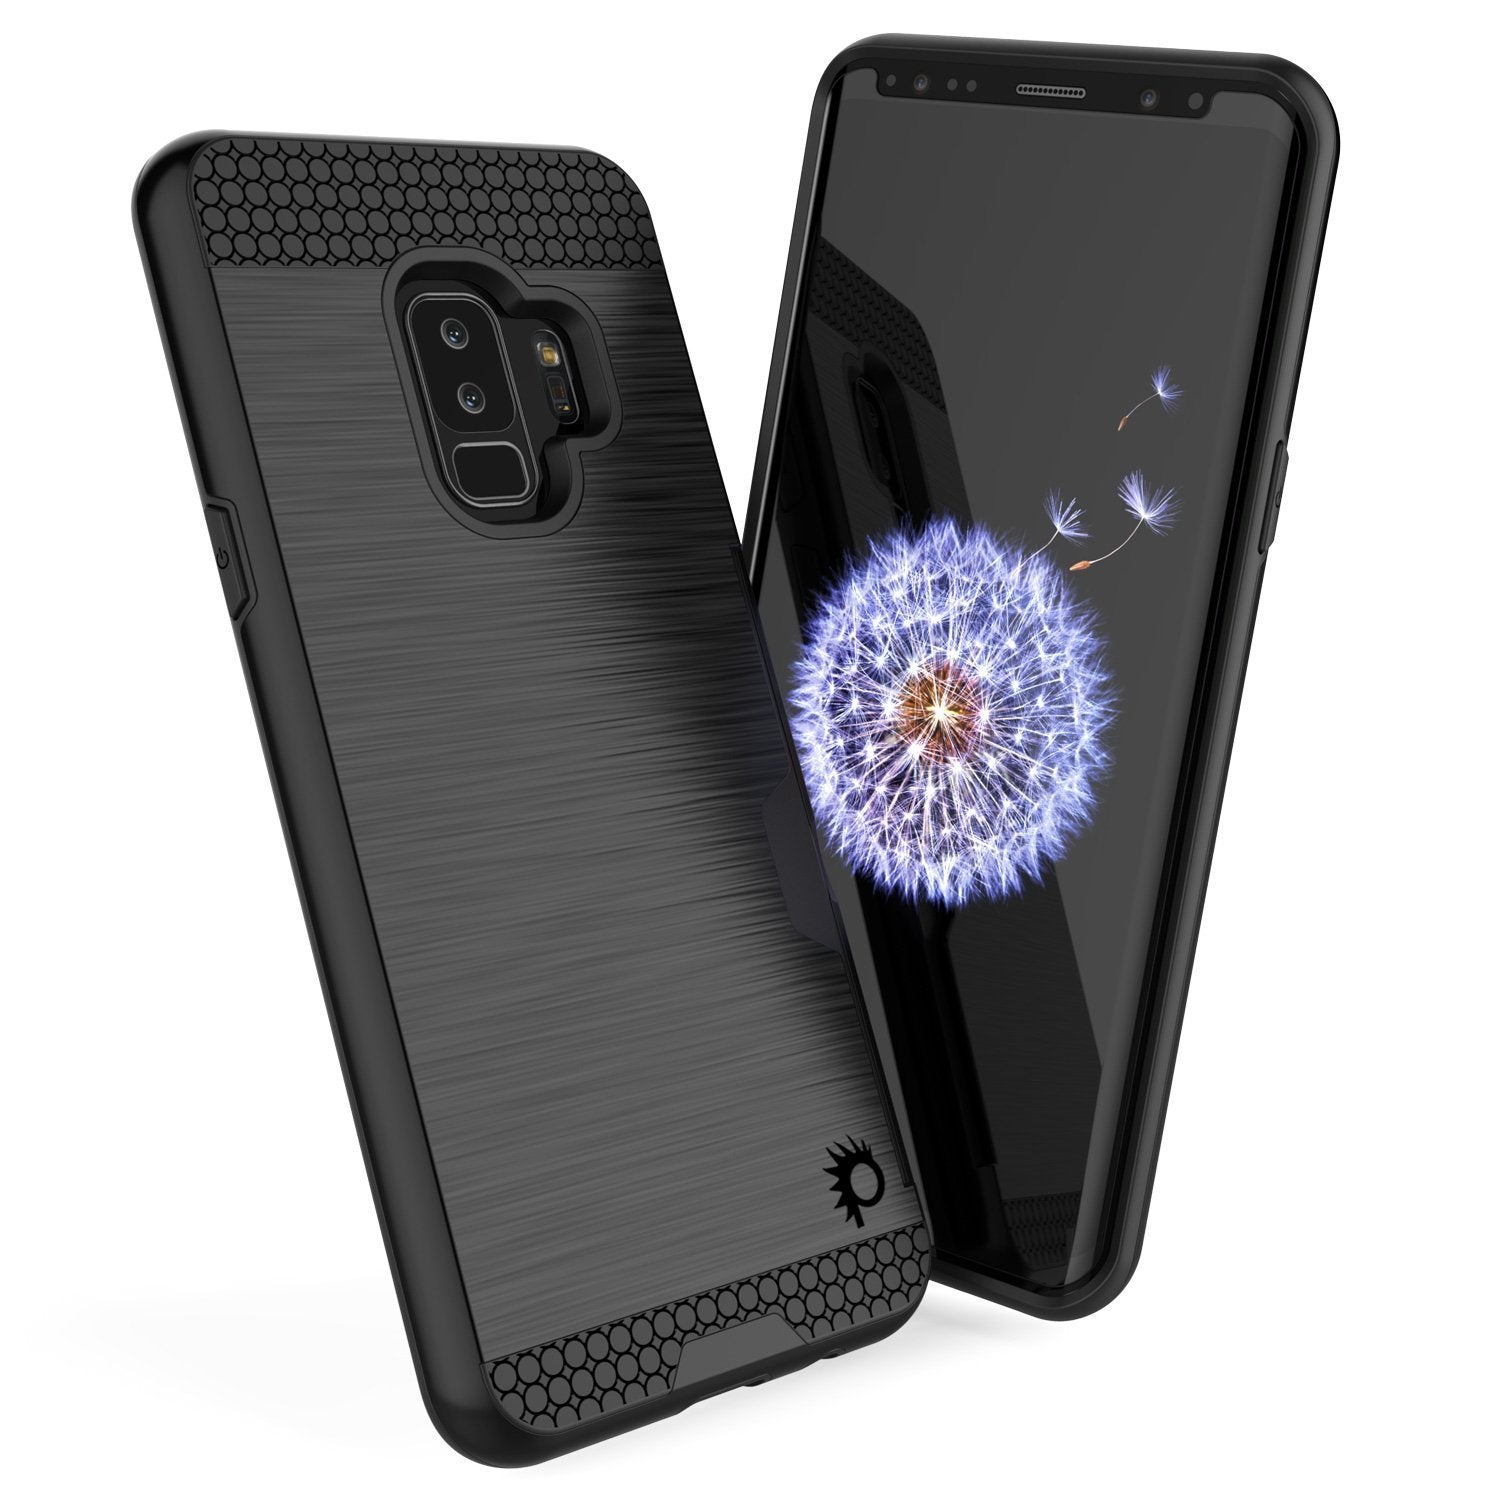 Galaxy S9 Plus Case, PUNKcase [SLOT Series] [Slim Fit] Dual-Layer Armor Cover w/Integrated Anti-Shock System, Credit Card Slot [Black] - PunkCase NZ